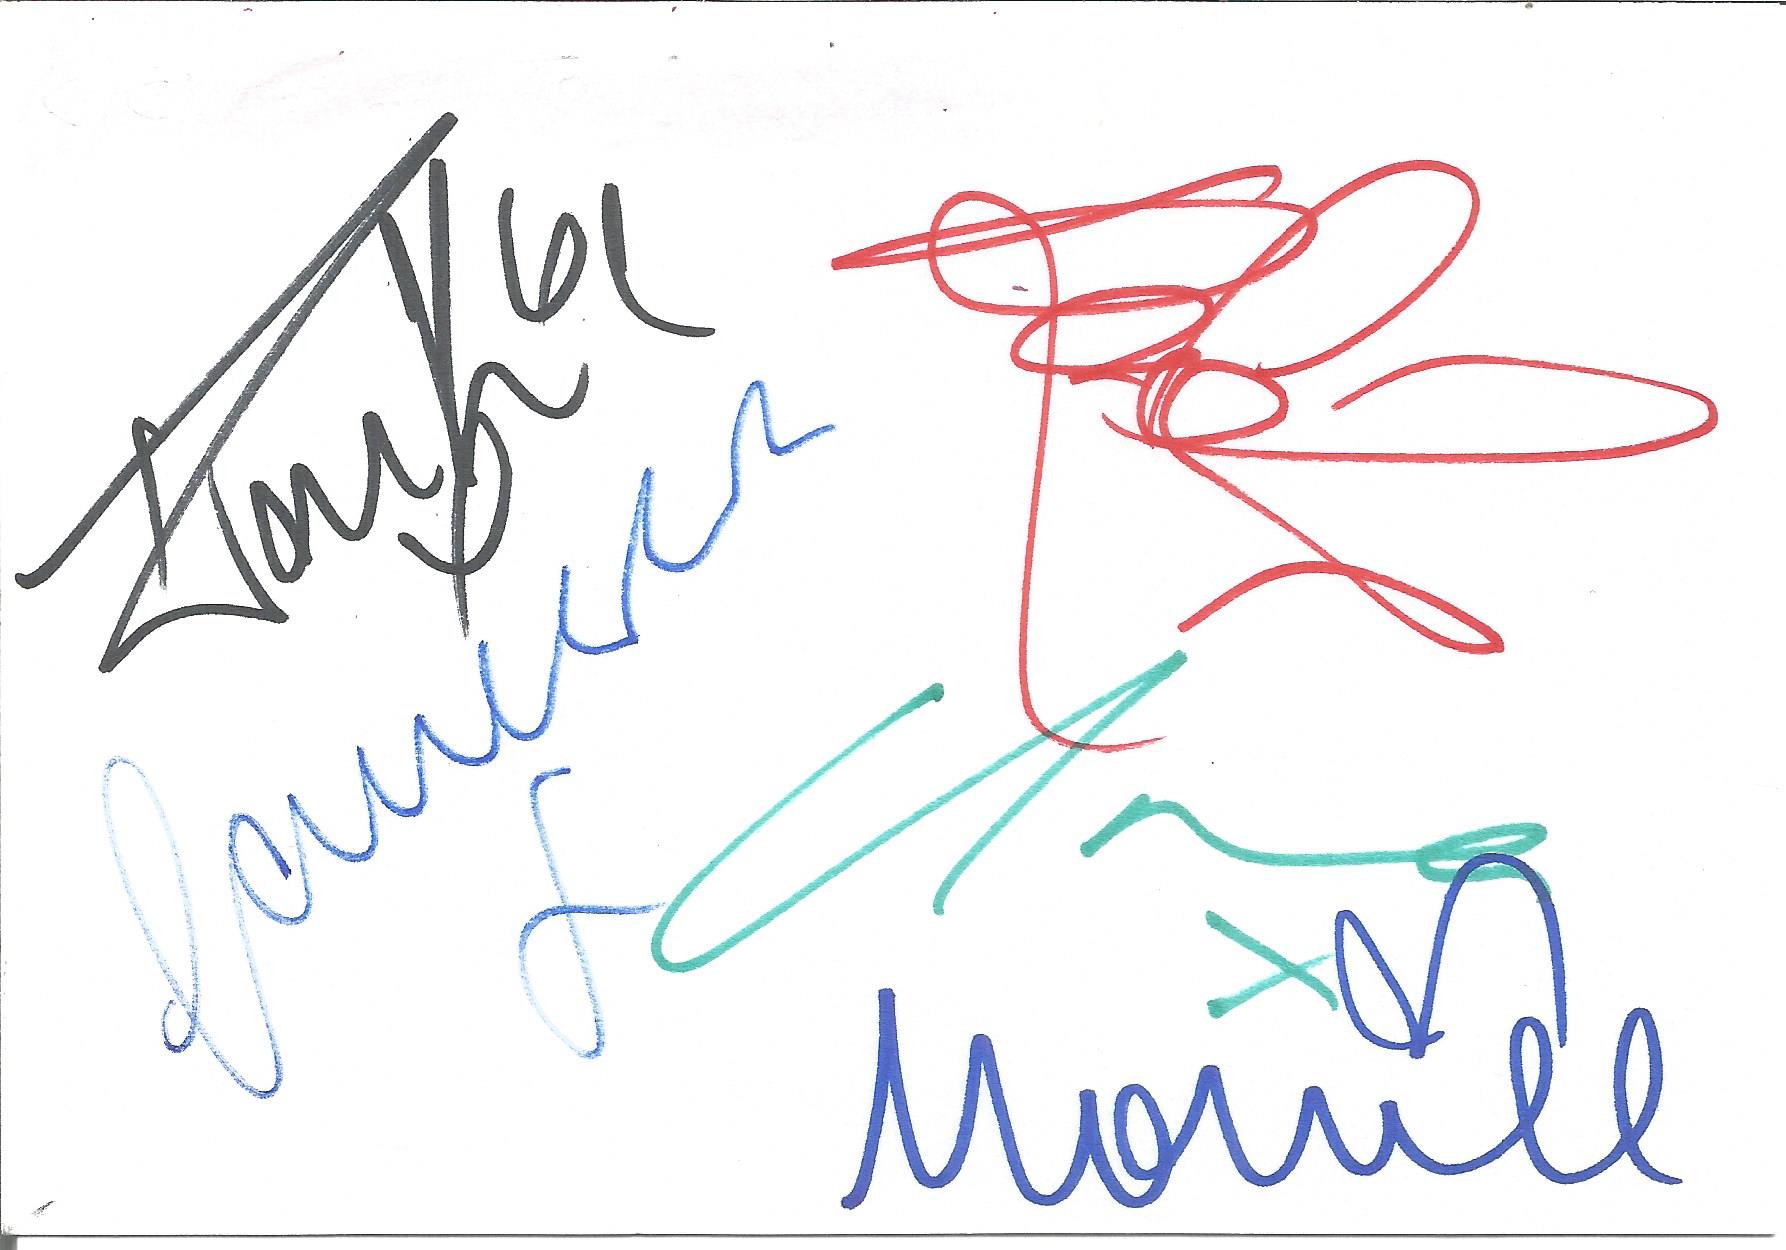 The Saturdays girl group signed white card. Signed by Frankie, Una, Rochelle, Mollie and Vanessa.